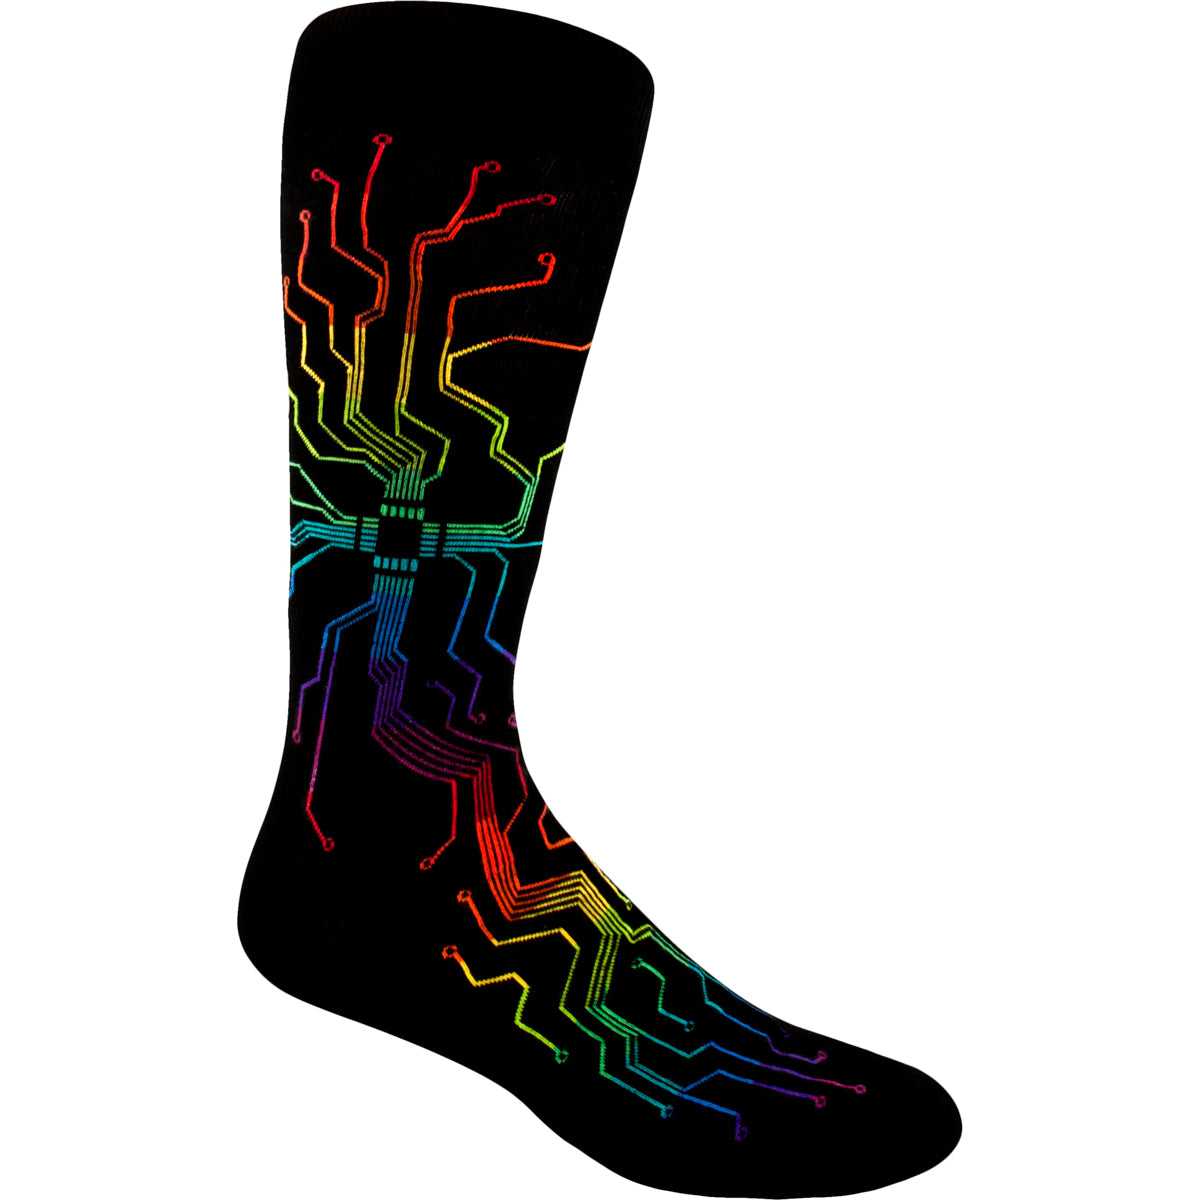 ModSocks introduces the mutha of all circuitboard socks — rainbow-gradient patterned Muthaboard Men's Crew Socks in black.